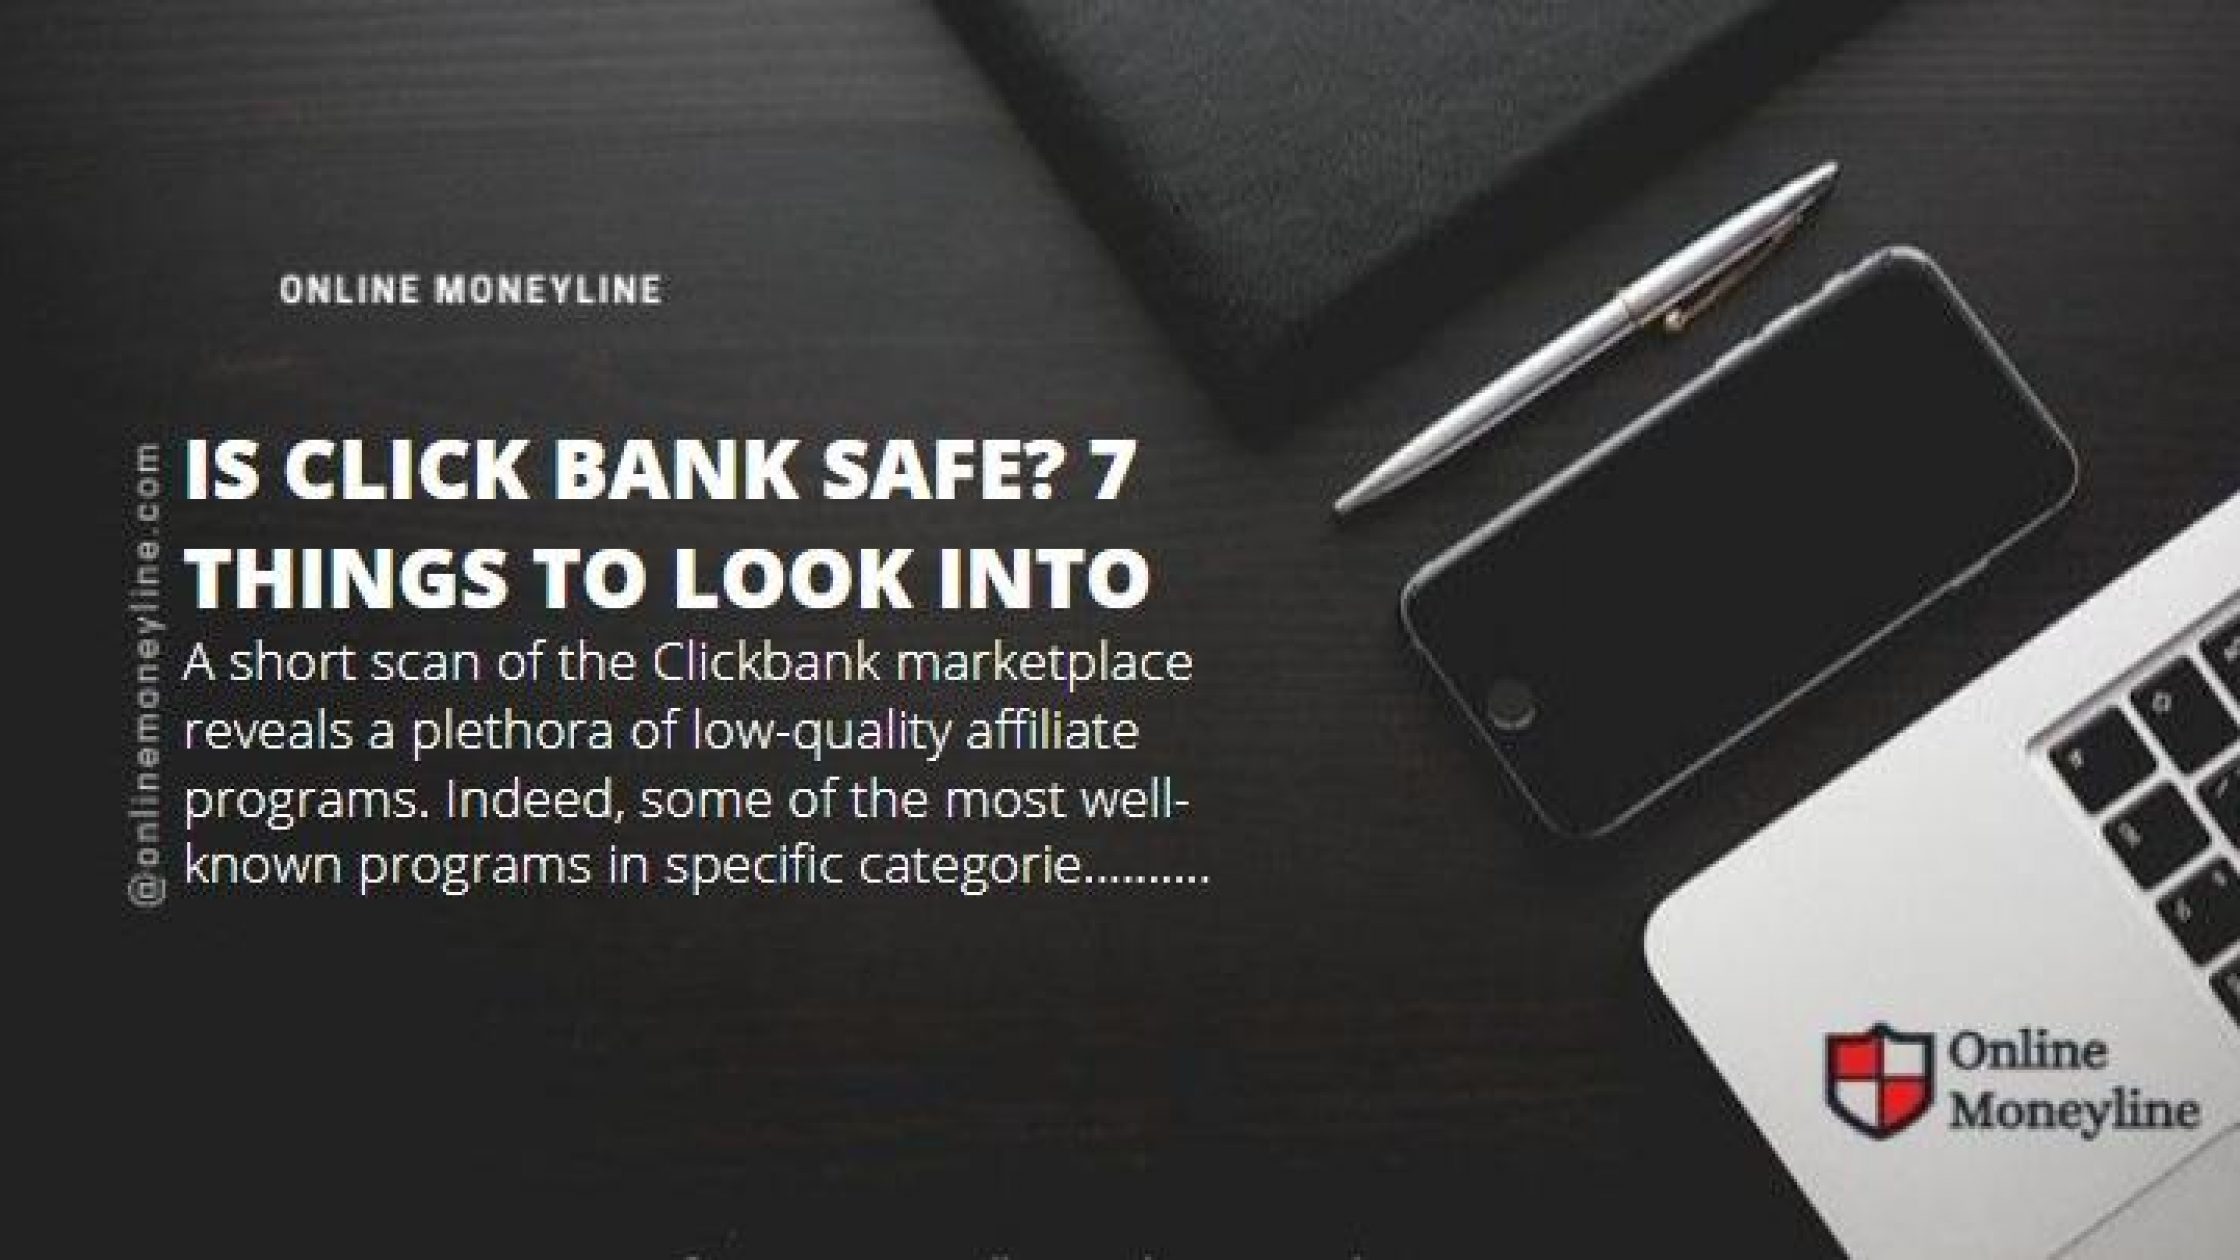 Is Clickbank safe? 7 things to look into